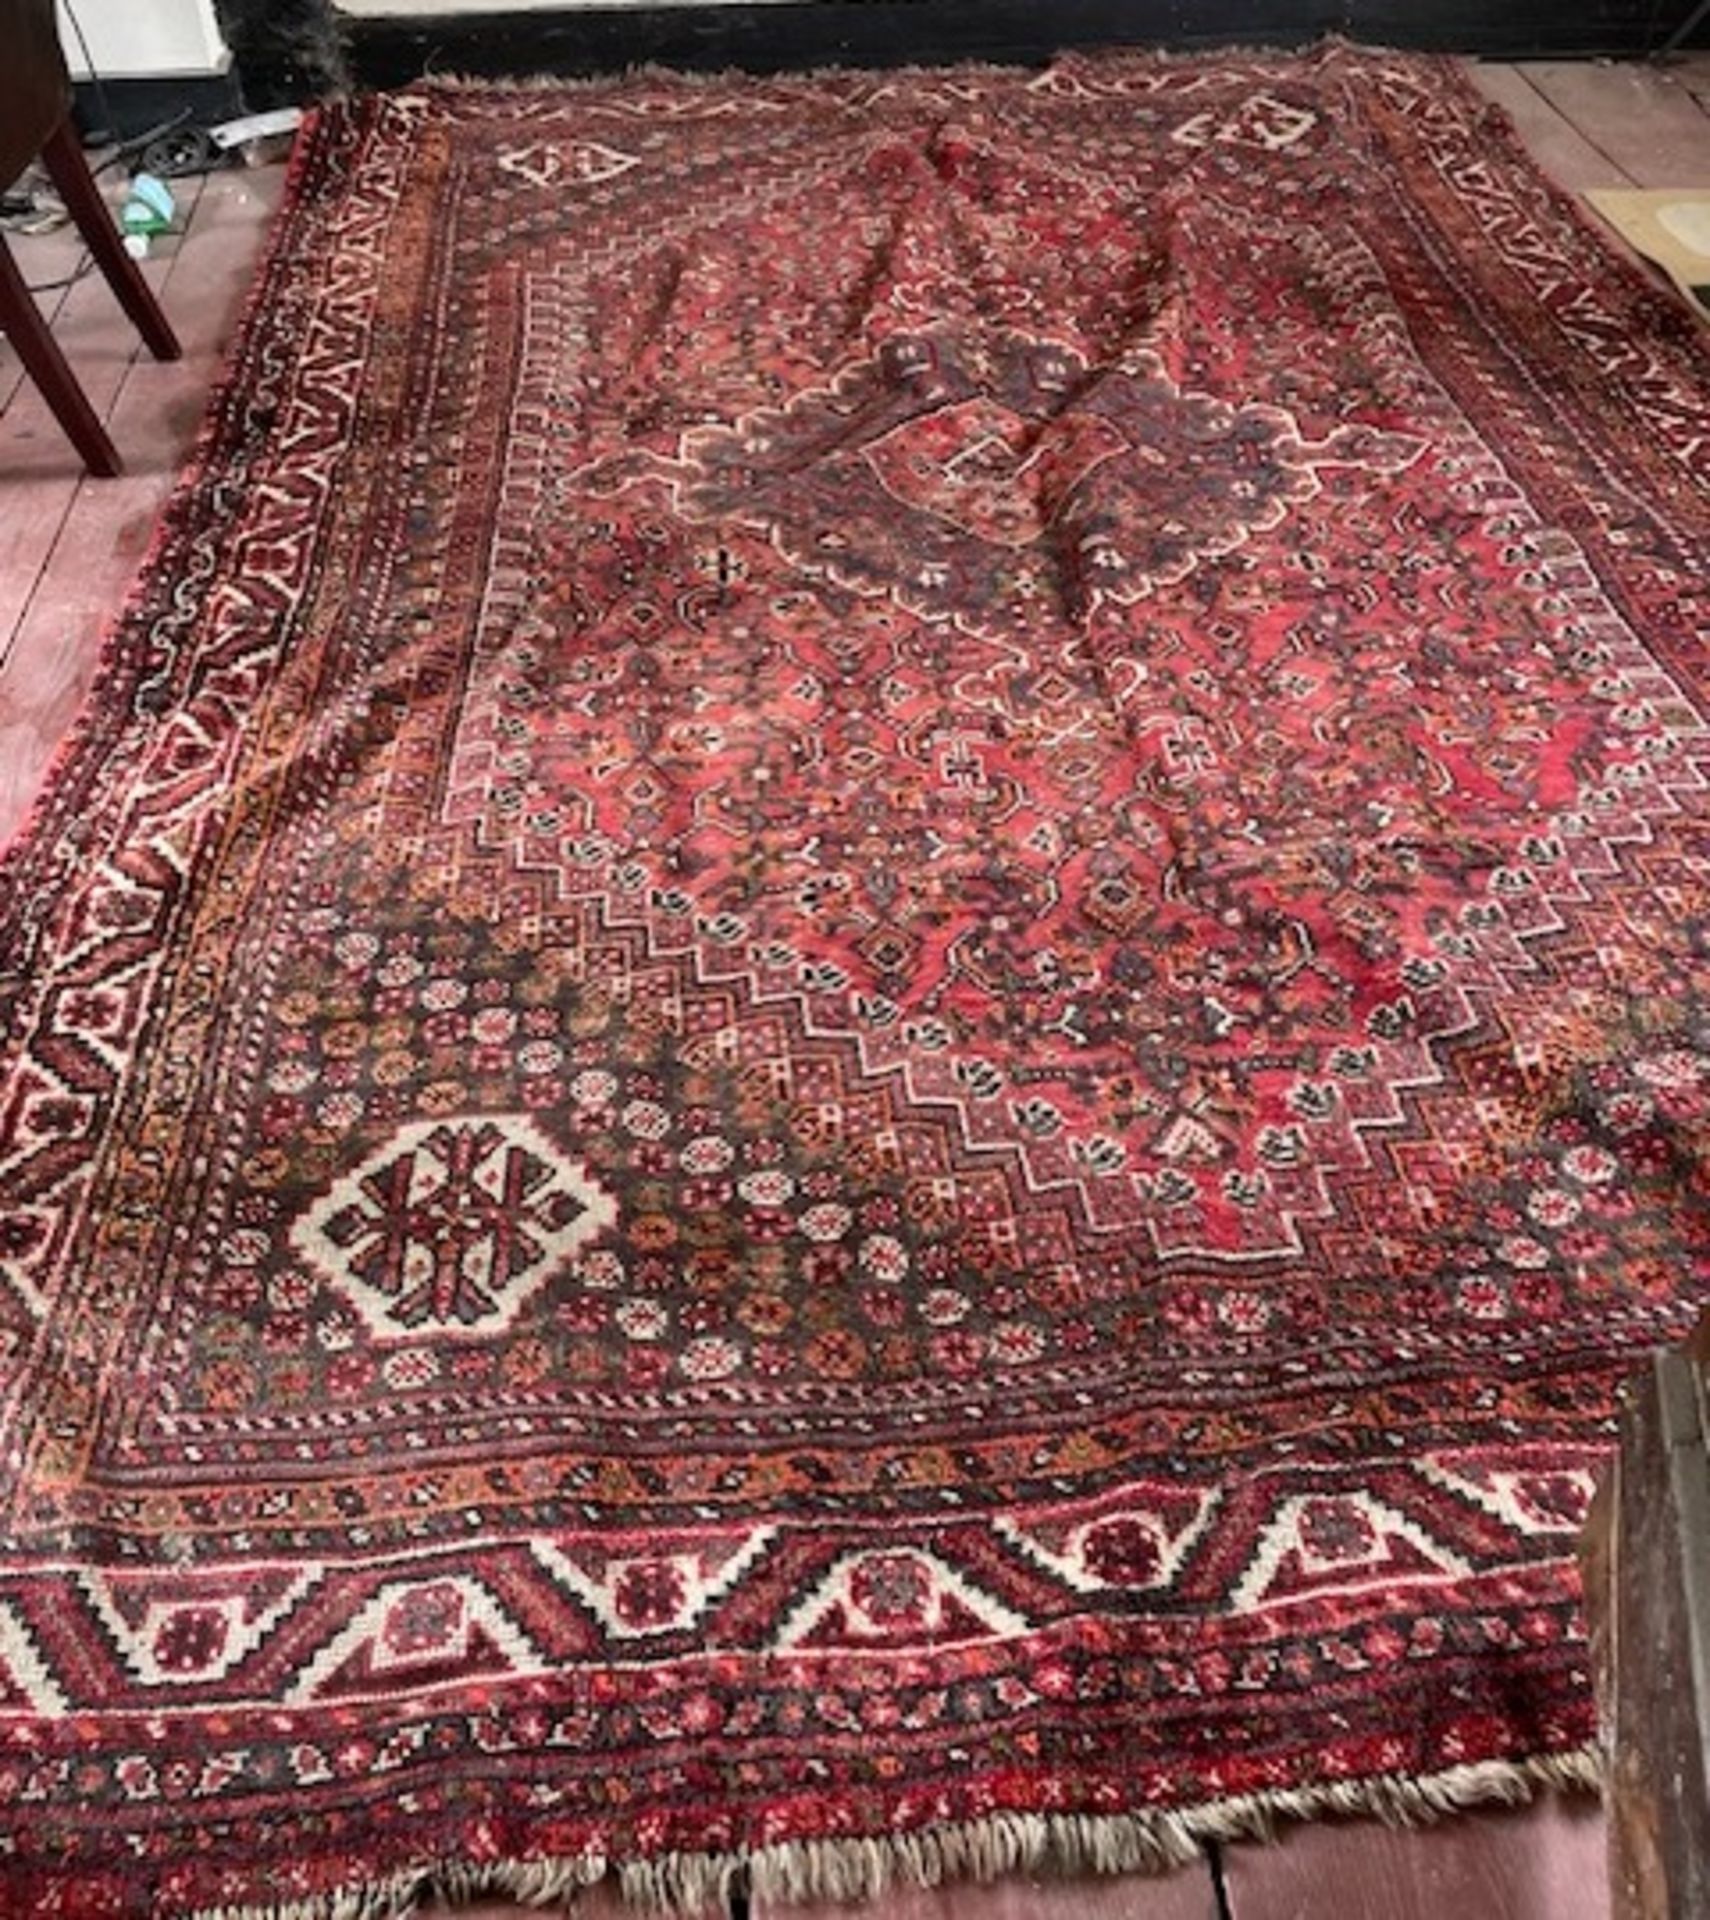 Patterned & Bordered Rug, Central Motif Surrounded by Stylized Floral Decoration & Multi Border, - Bild 2 aus 2